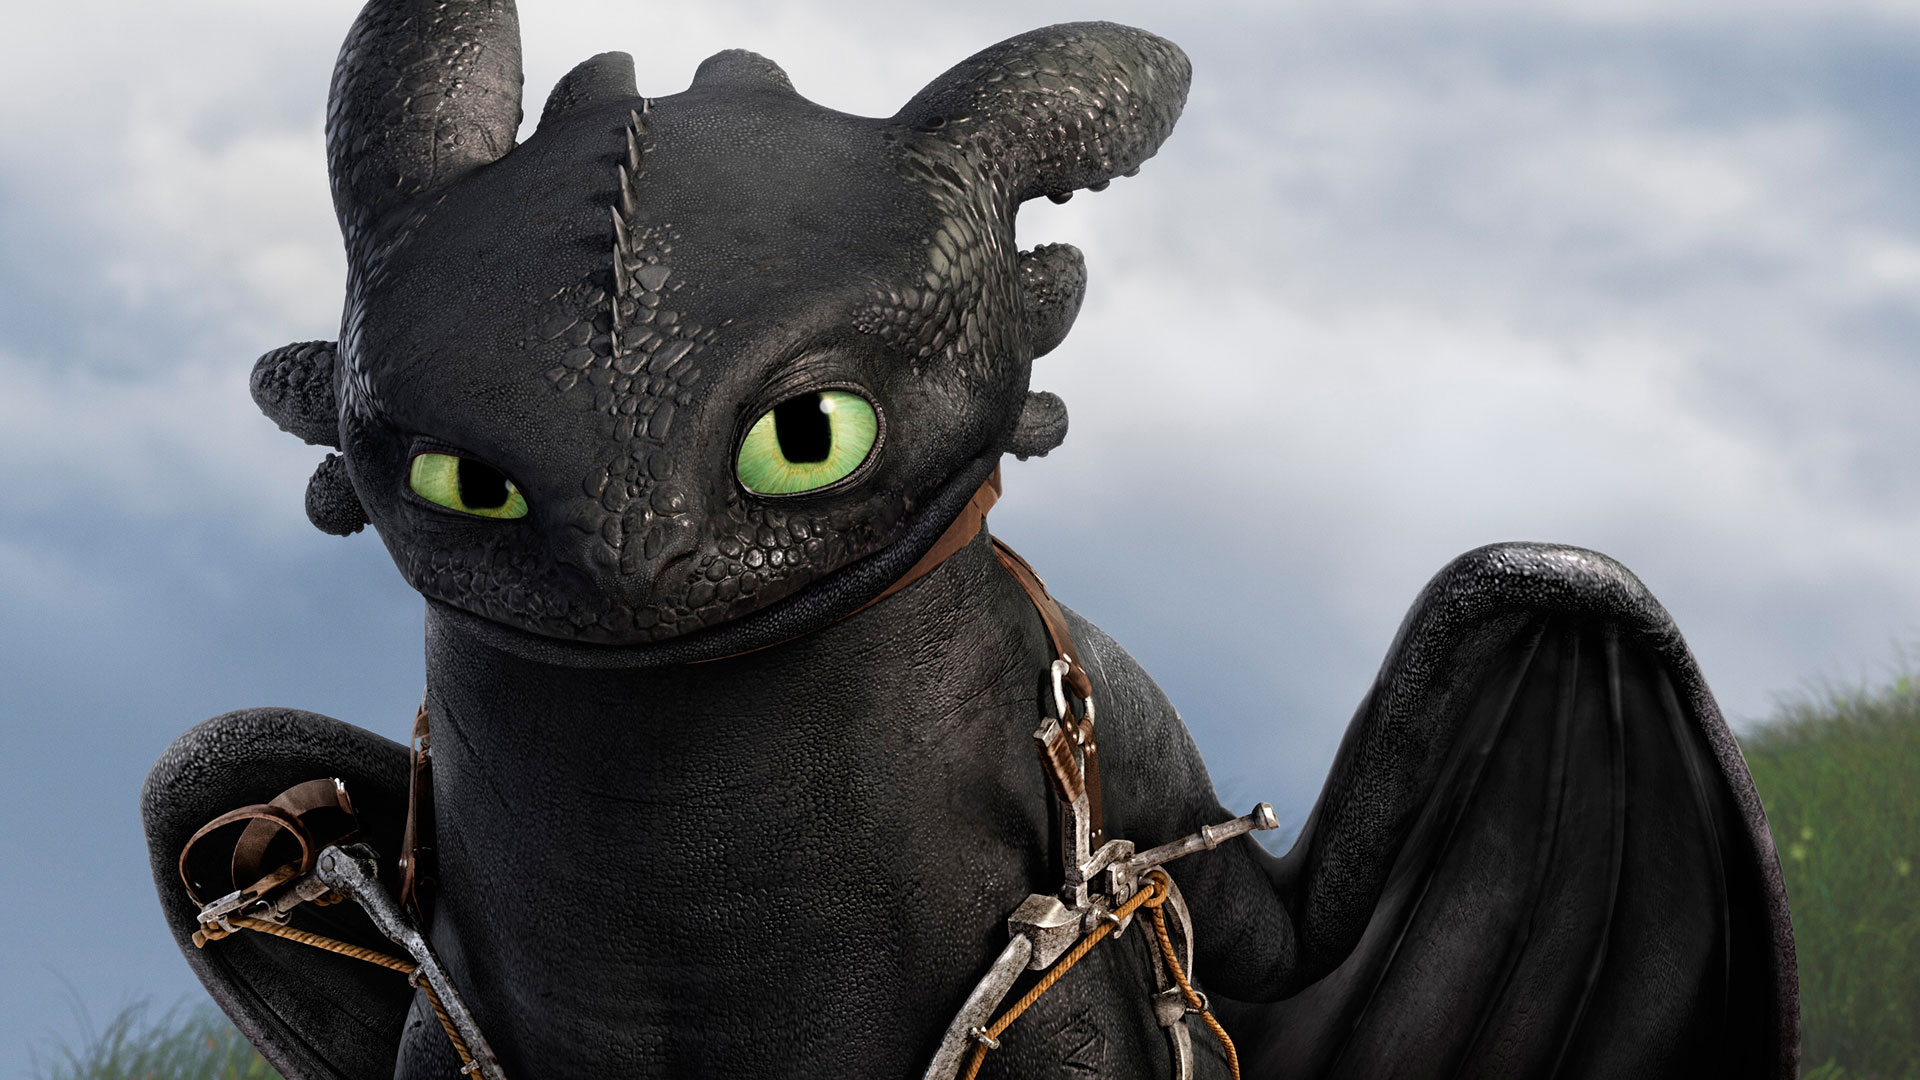 toothless the dragon wallpapers wallpaper cave on pictures of wallpaper how to train your dragon toothless flying